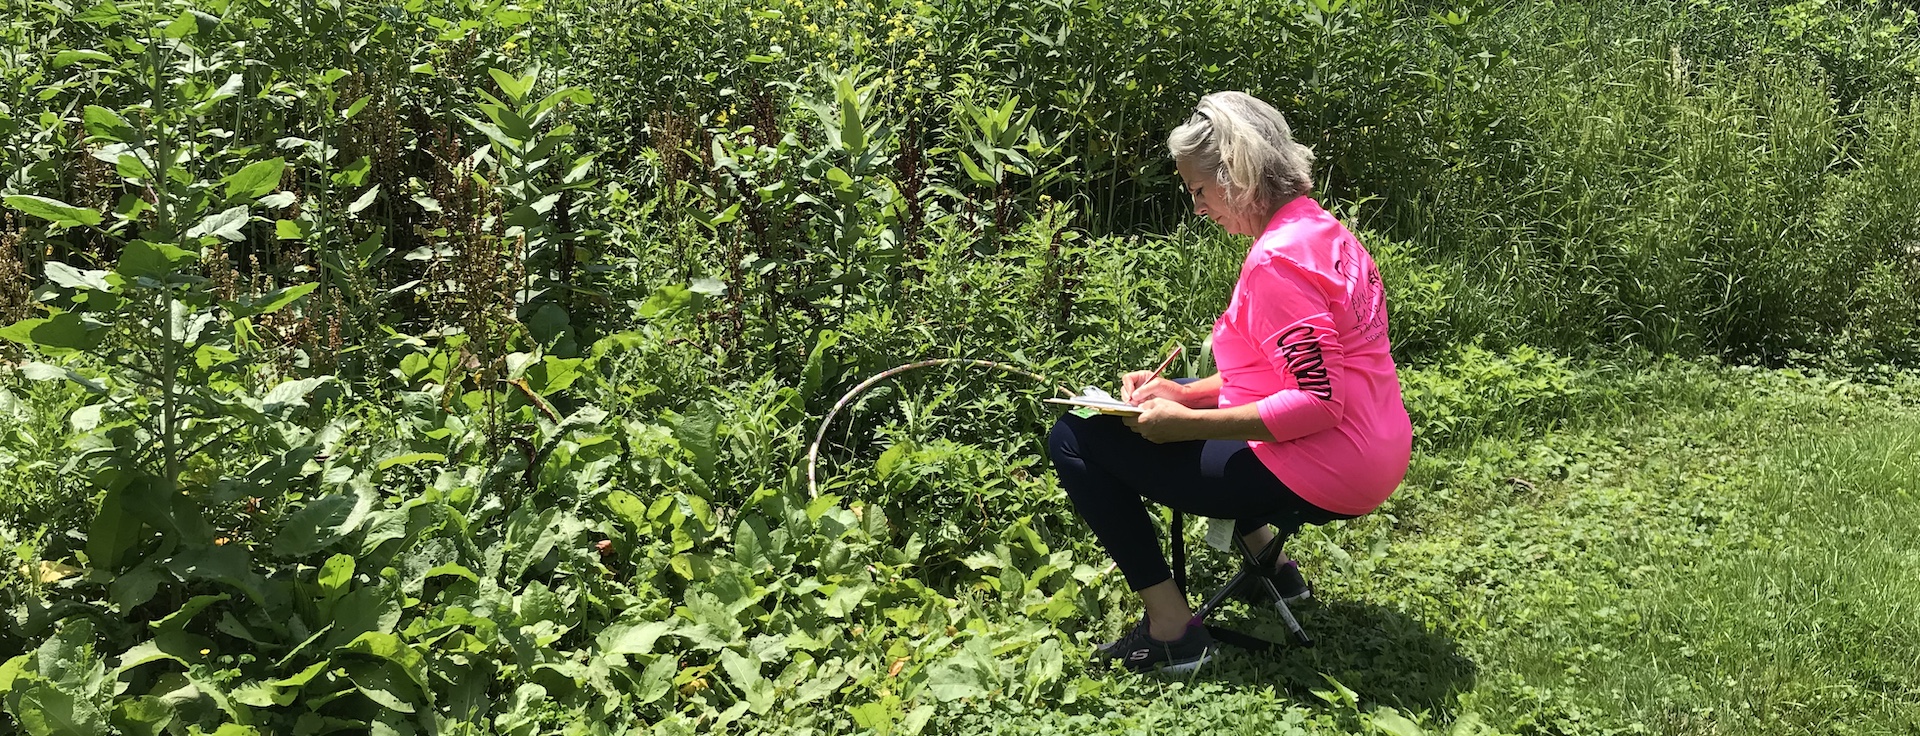 A woman sits near green bushes, looking down at her paper.